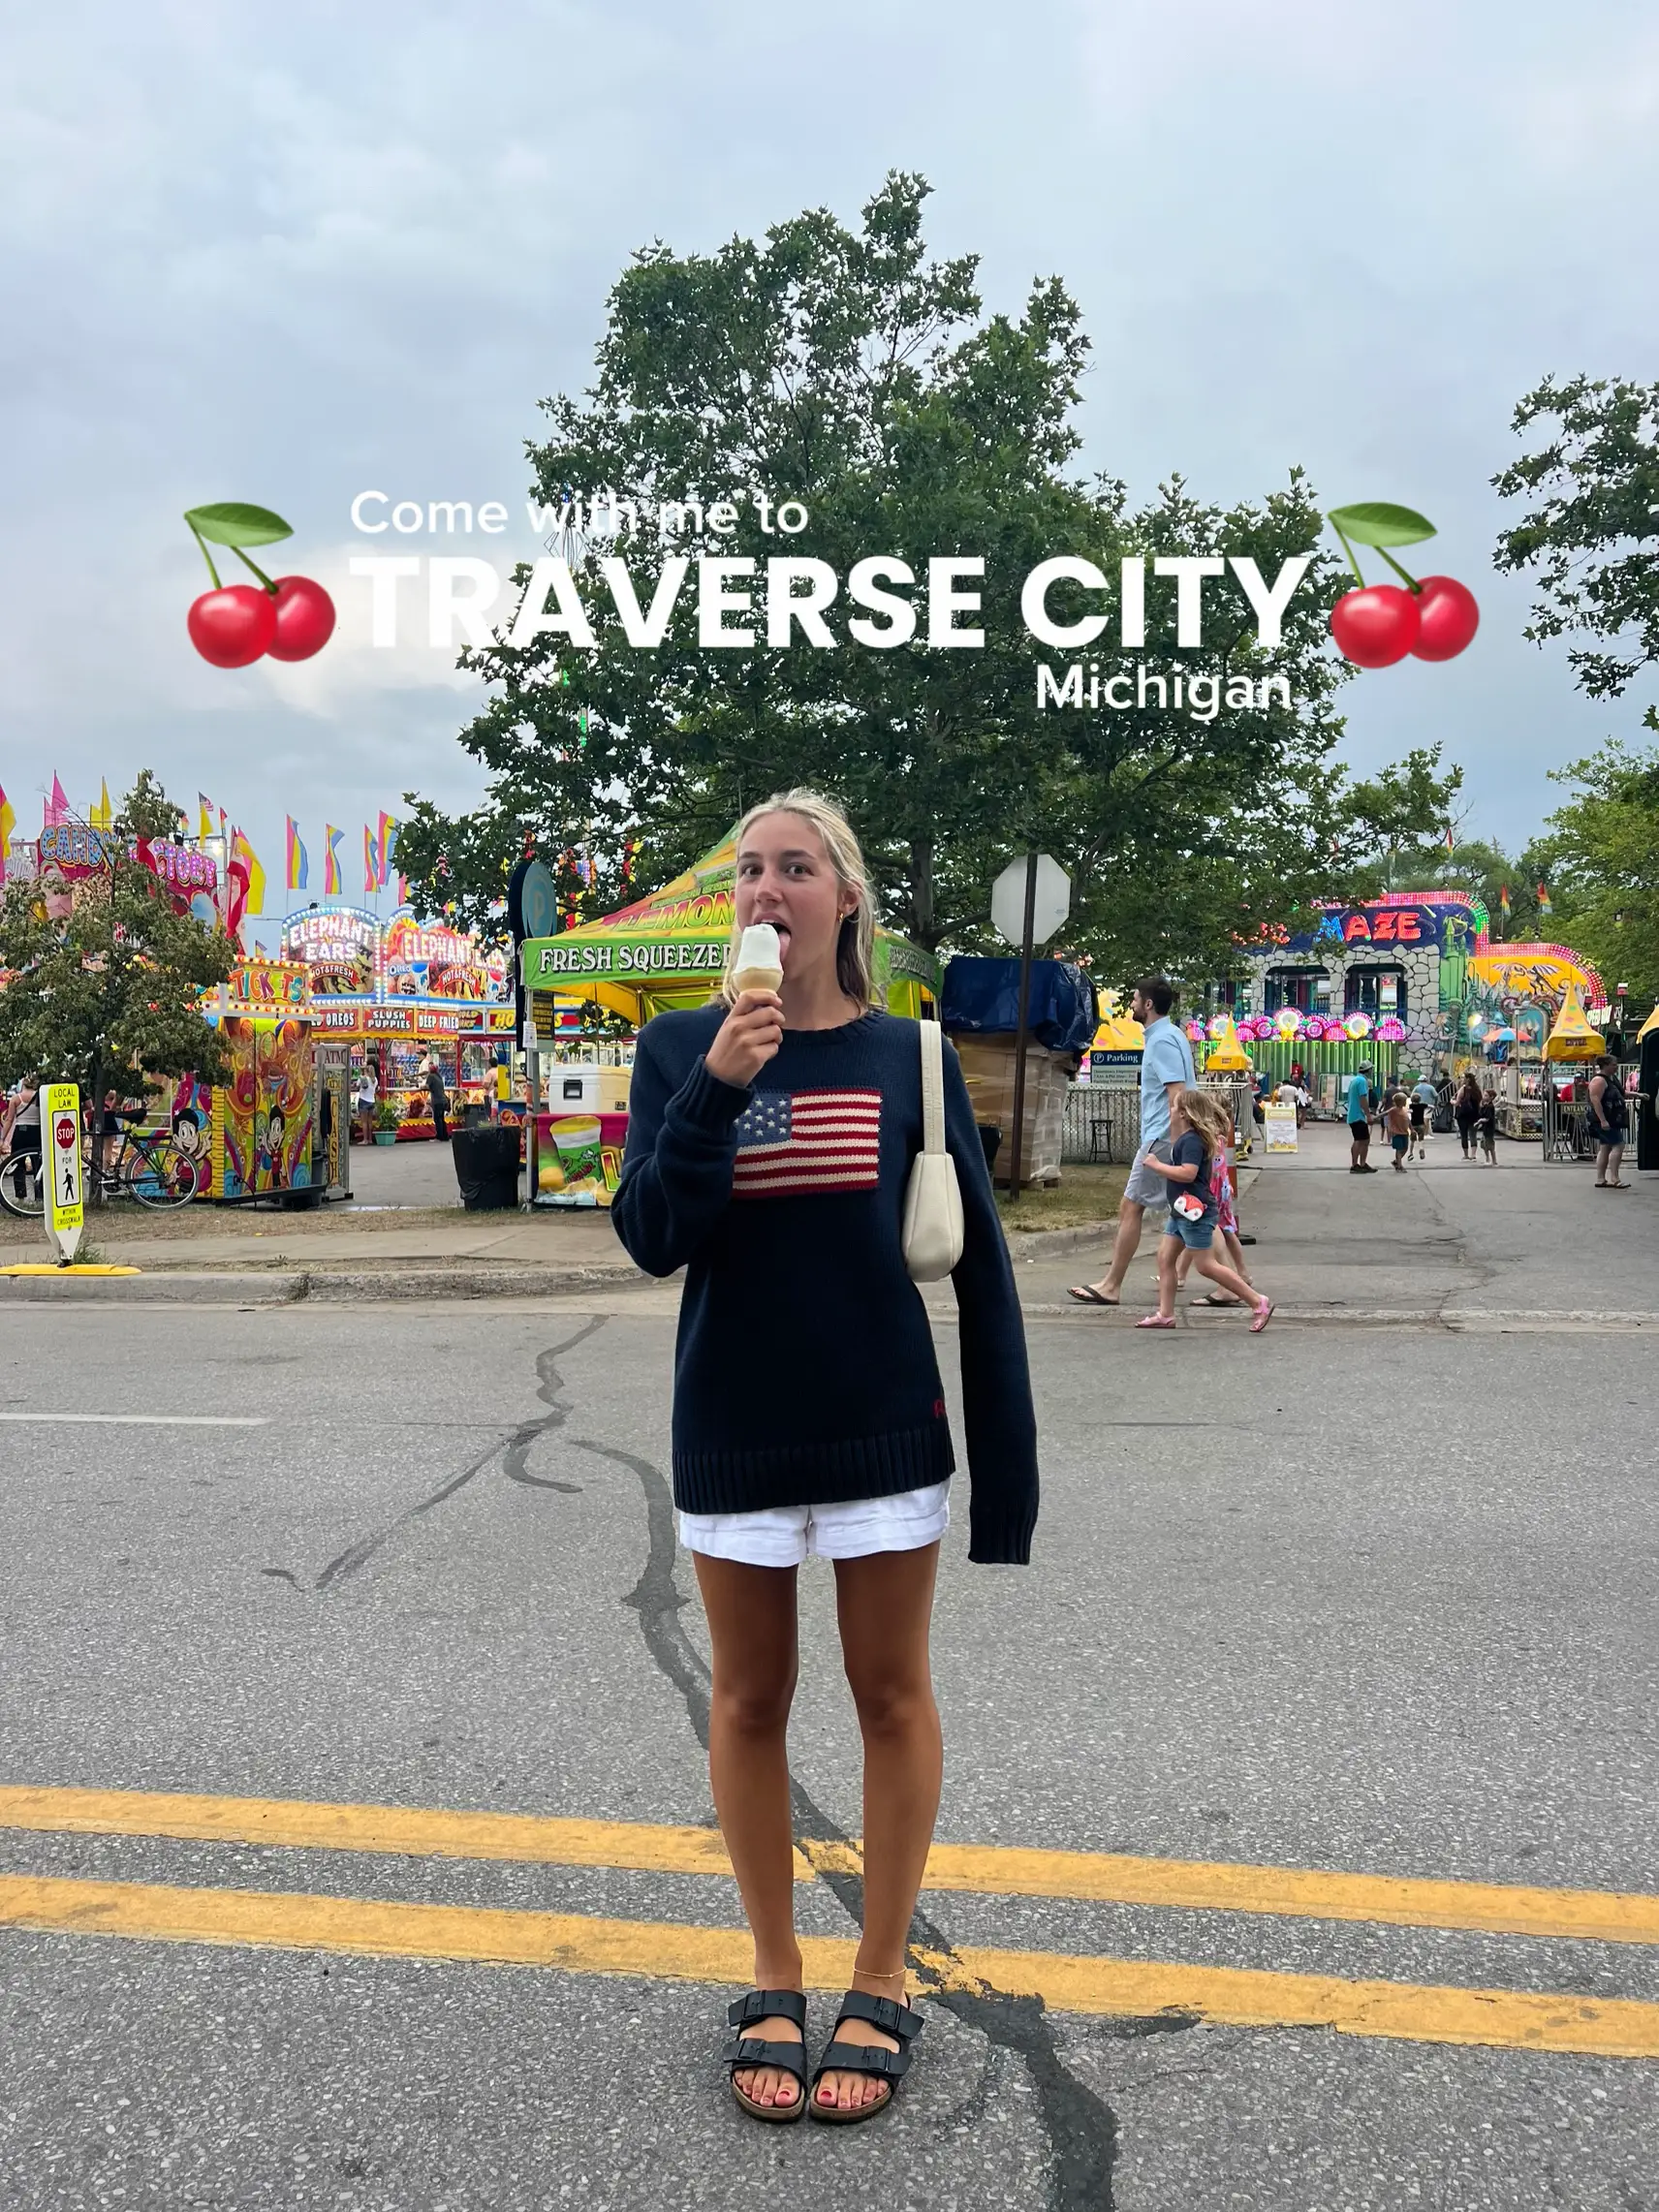 Cherry Festival Events In Traverse City